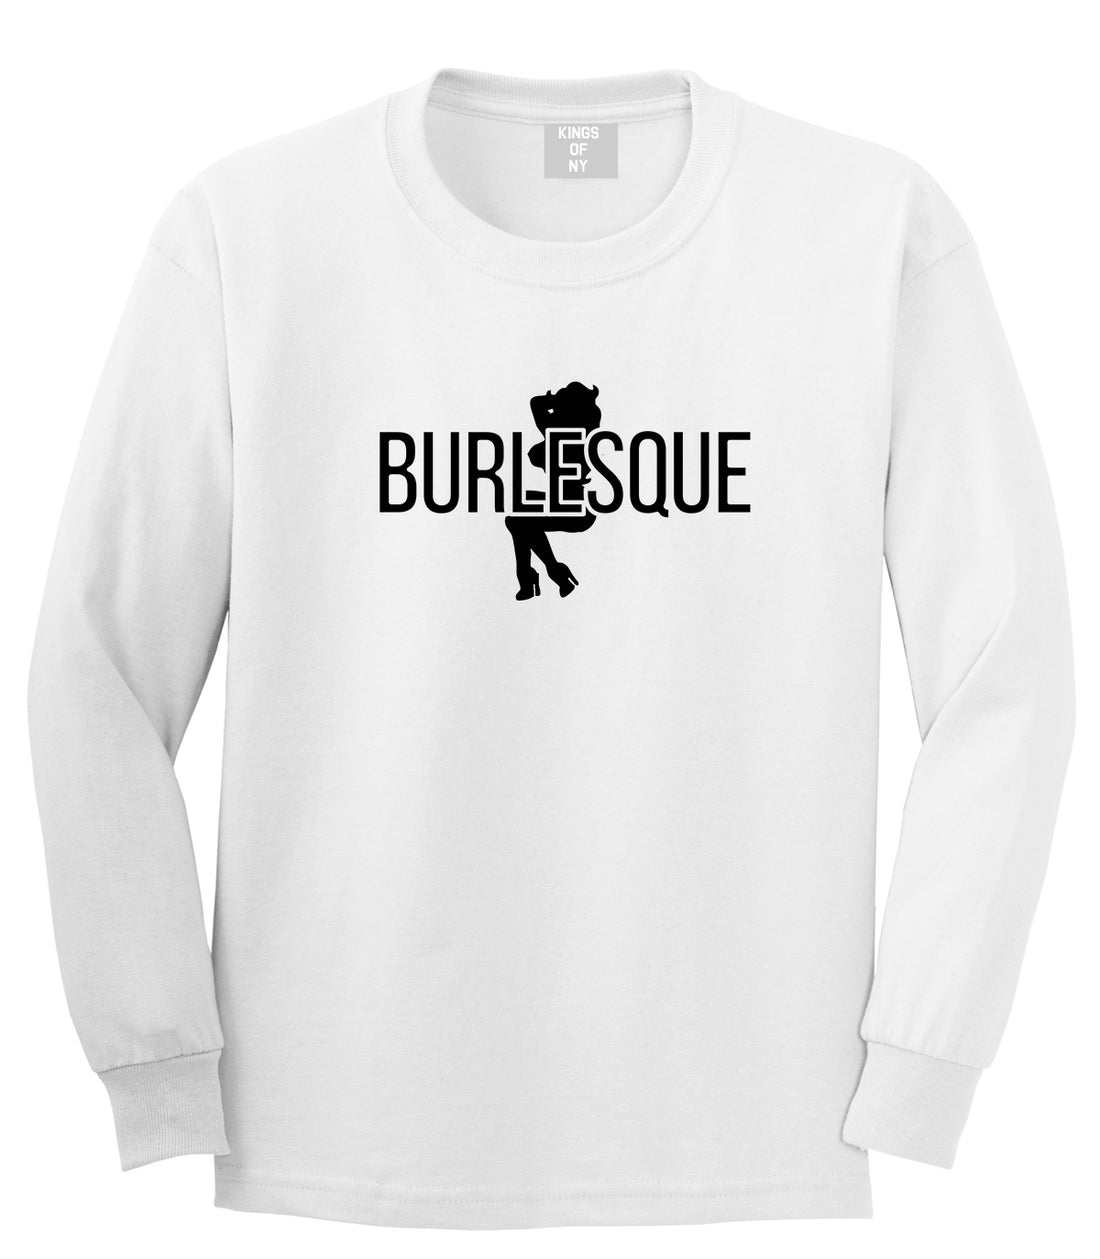 Burlesque Girl White Long Sleeve T-Shirt by Kings Of NY